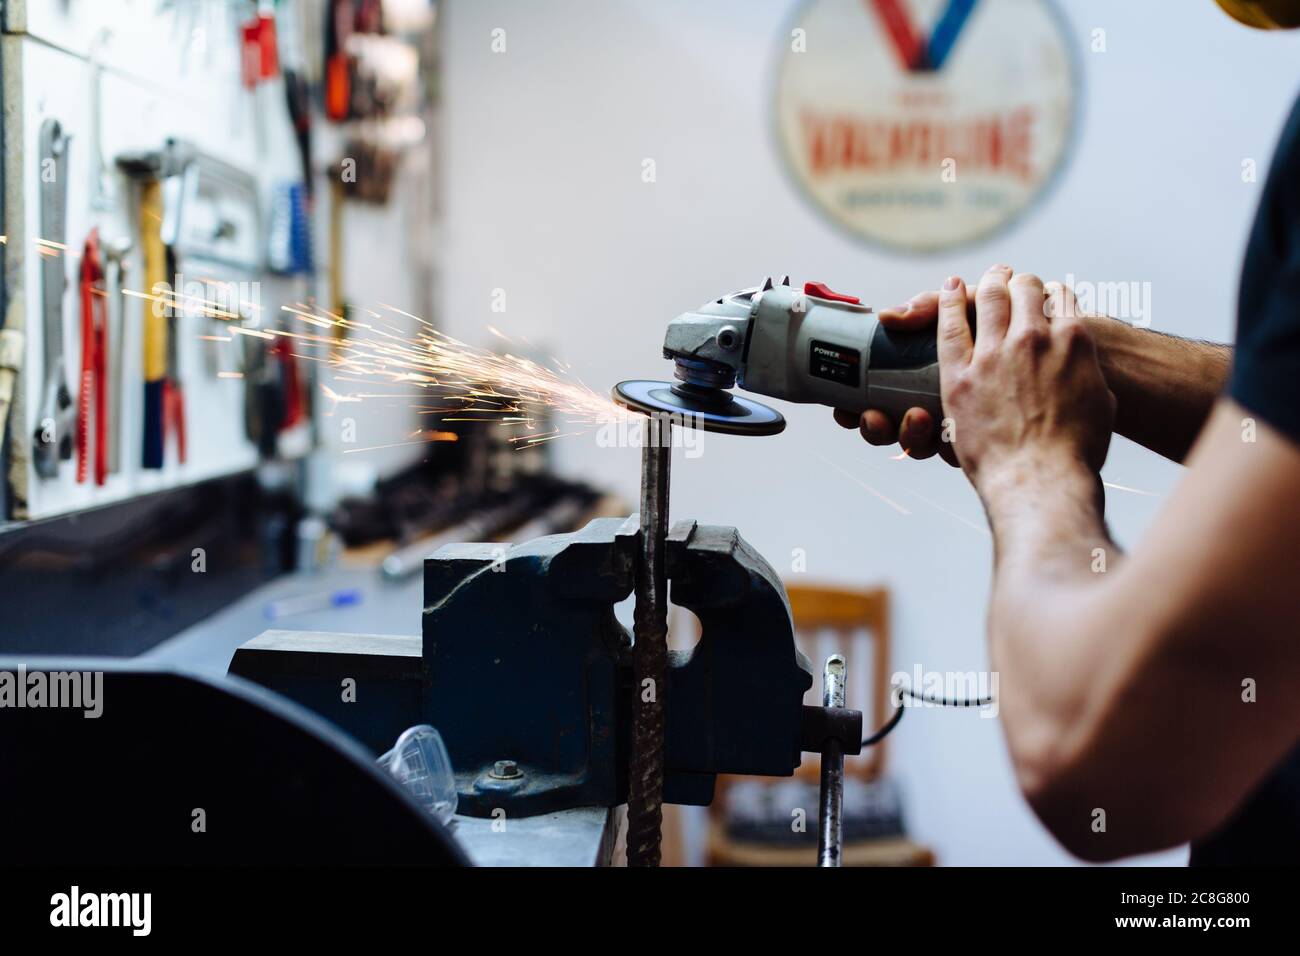 Young man using angle grinder on metal in workshop, cropped Stock Photo